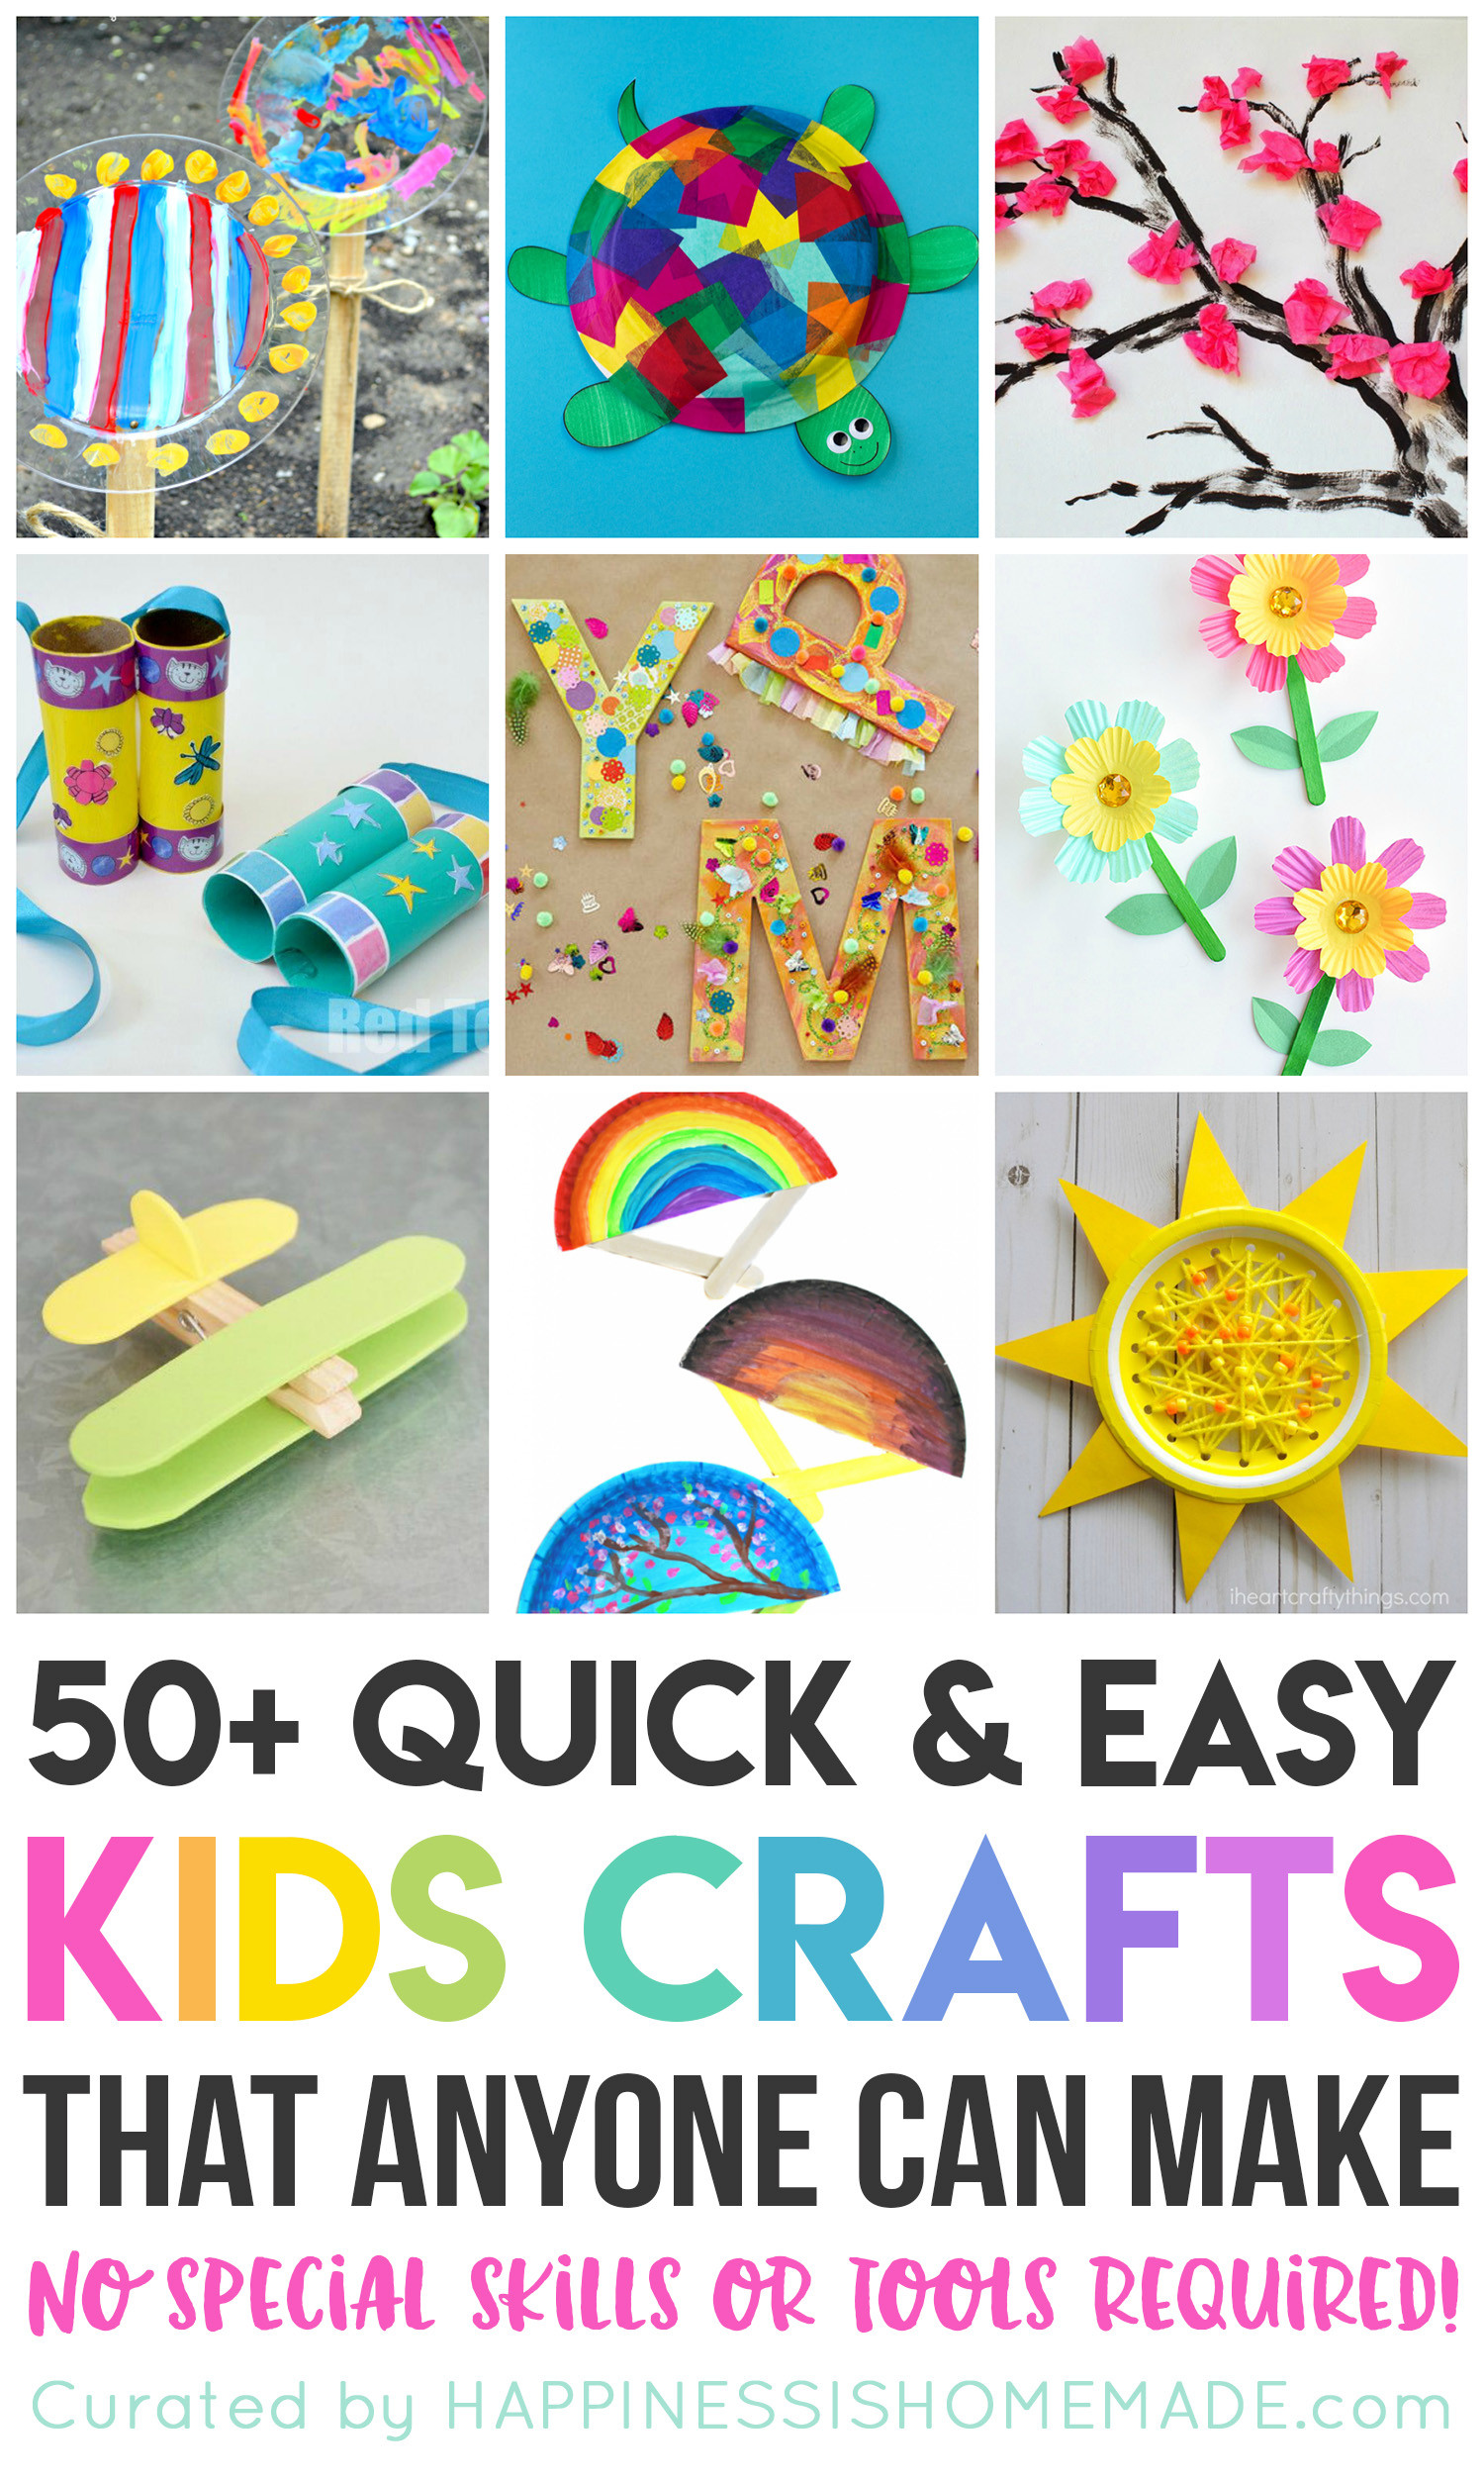 Simple Projects For Kids
 50 Quick & Easy Kids Crafts that ANYONE Can Make